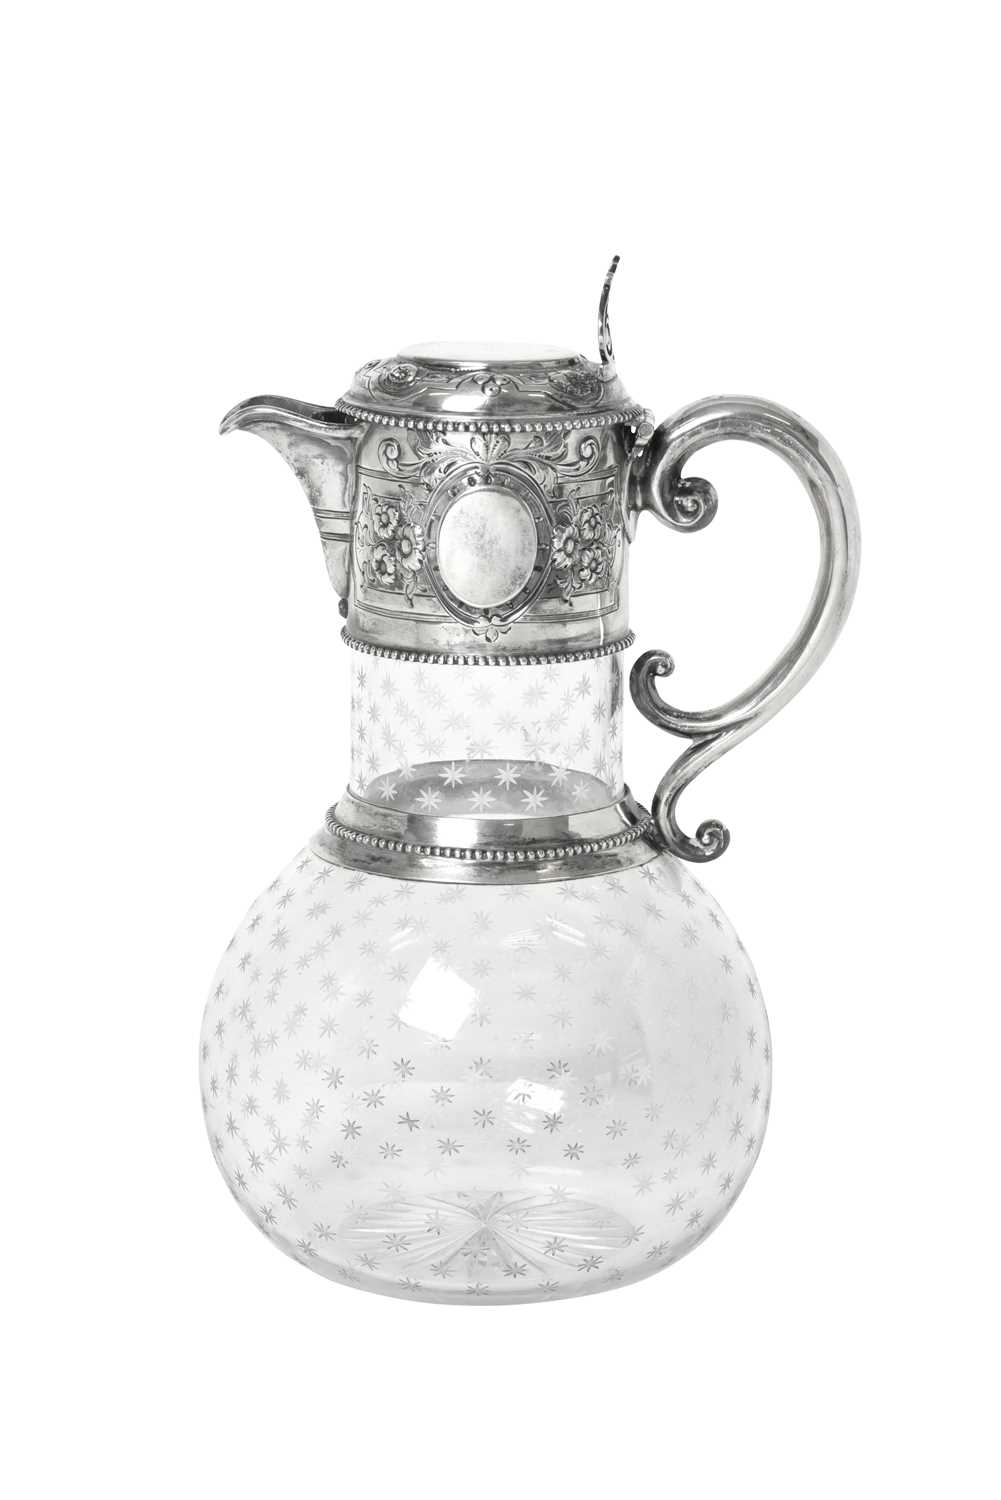 Lot 2267 - A Victorian Silver-Mounted Engraved-Glass Claret-Jug